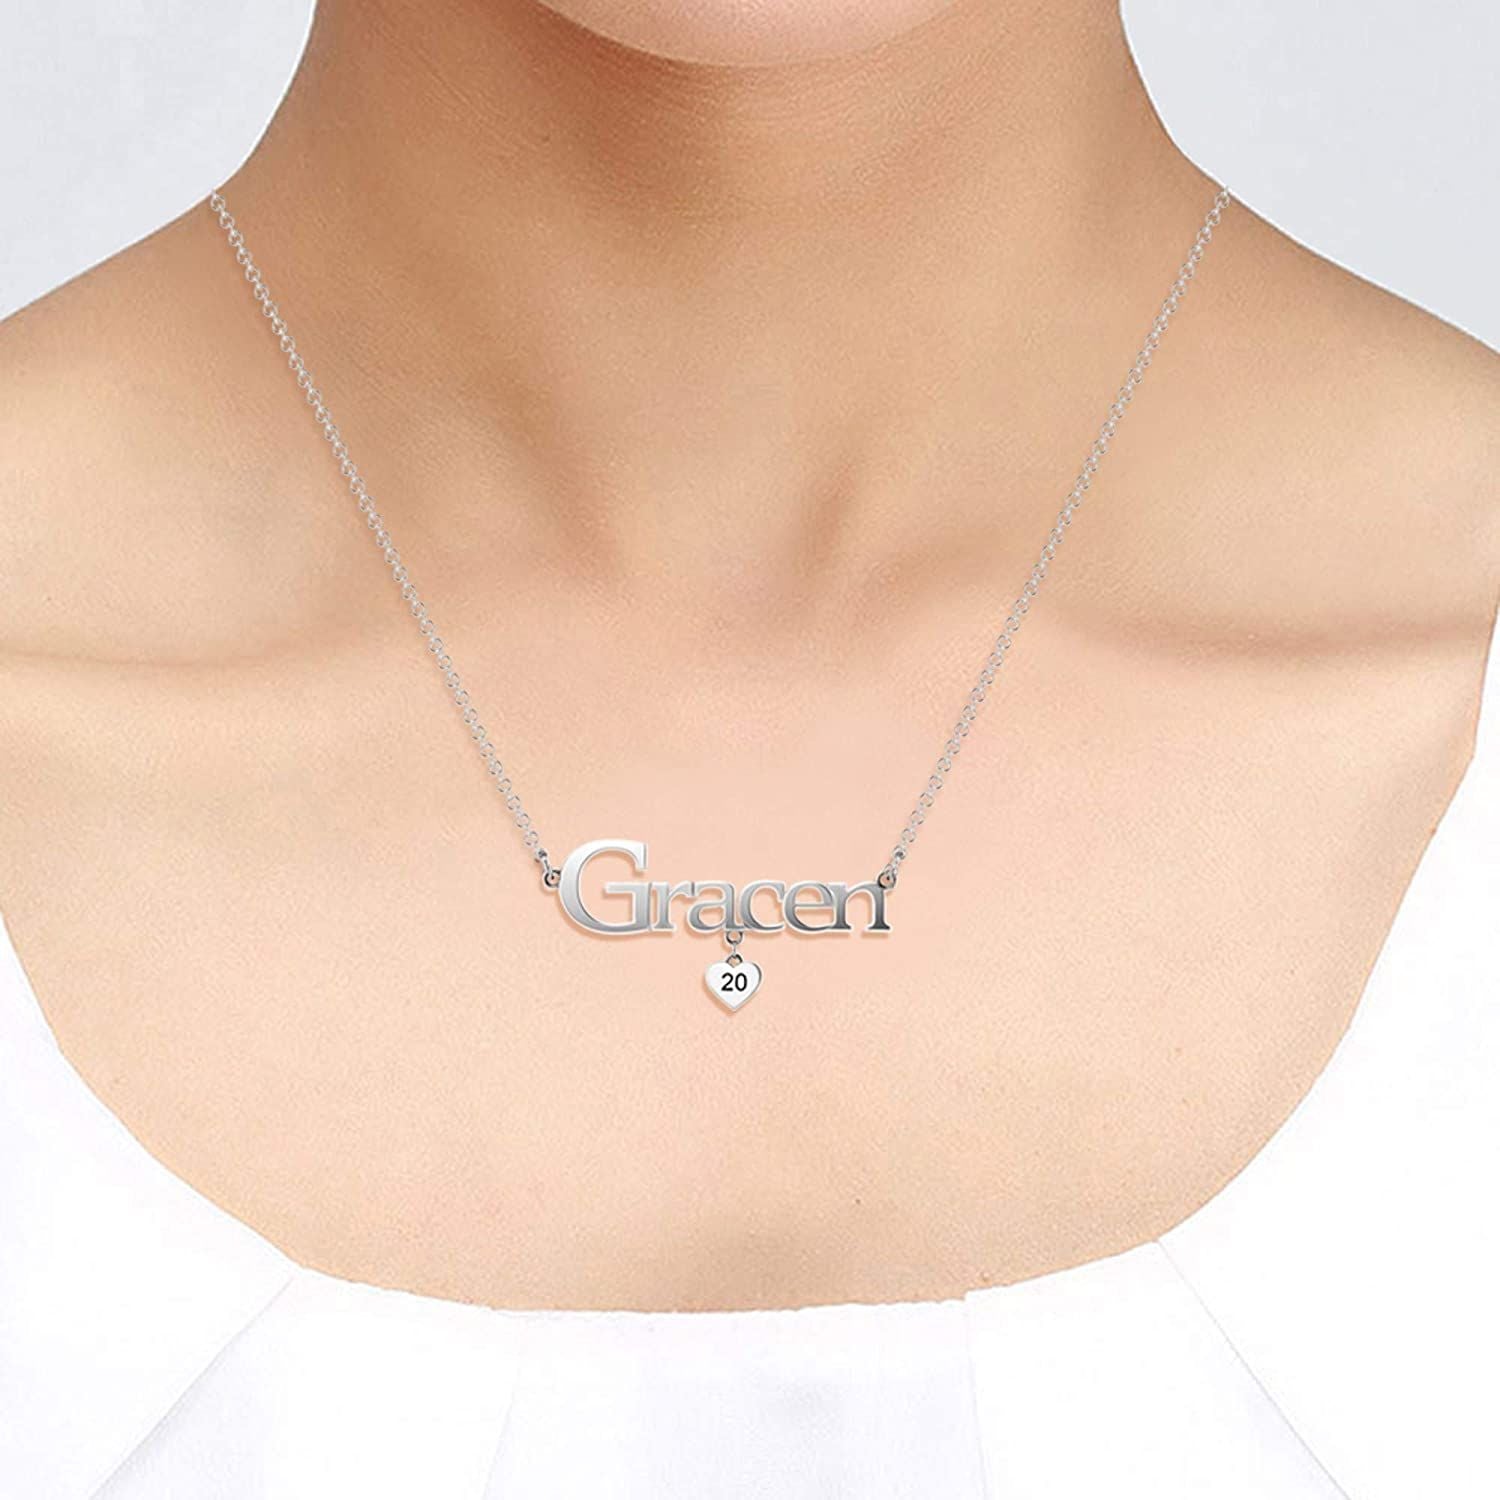 Personalised 925 Sterling Silver Graduation Name and Year Heart Charm Necklace for Teen Women